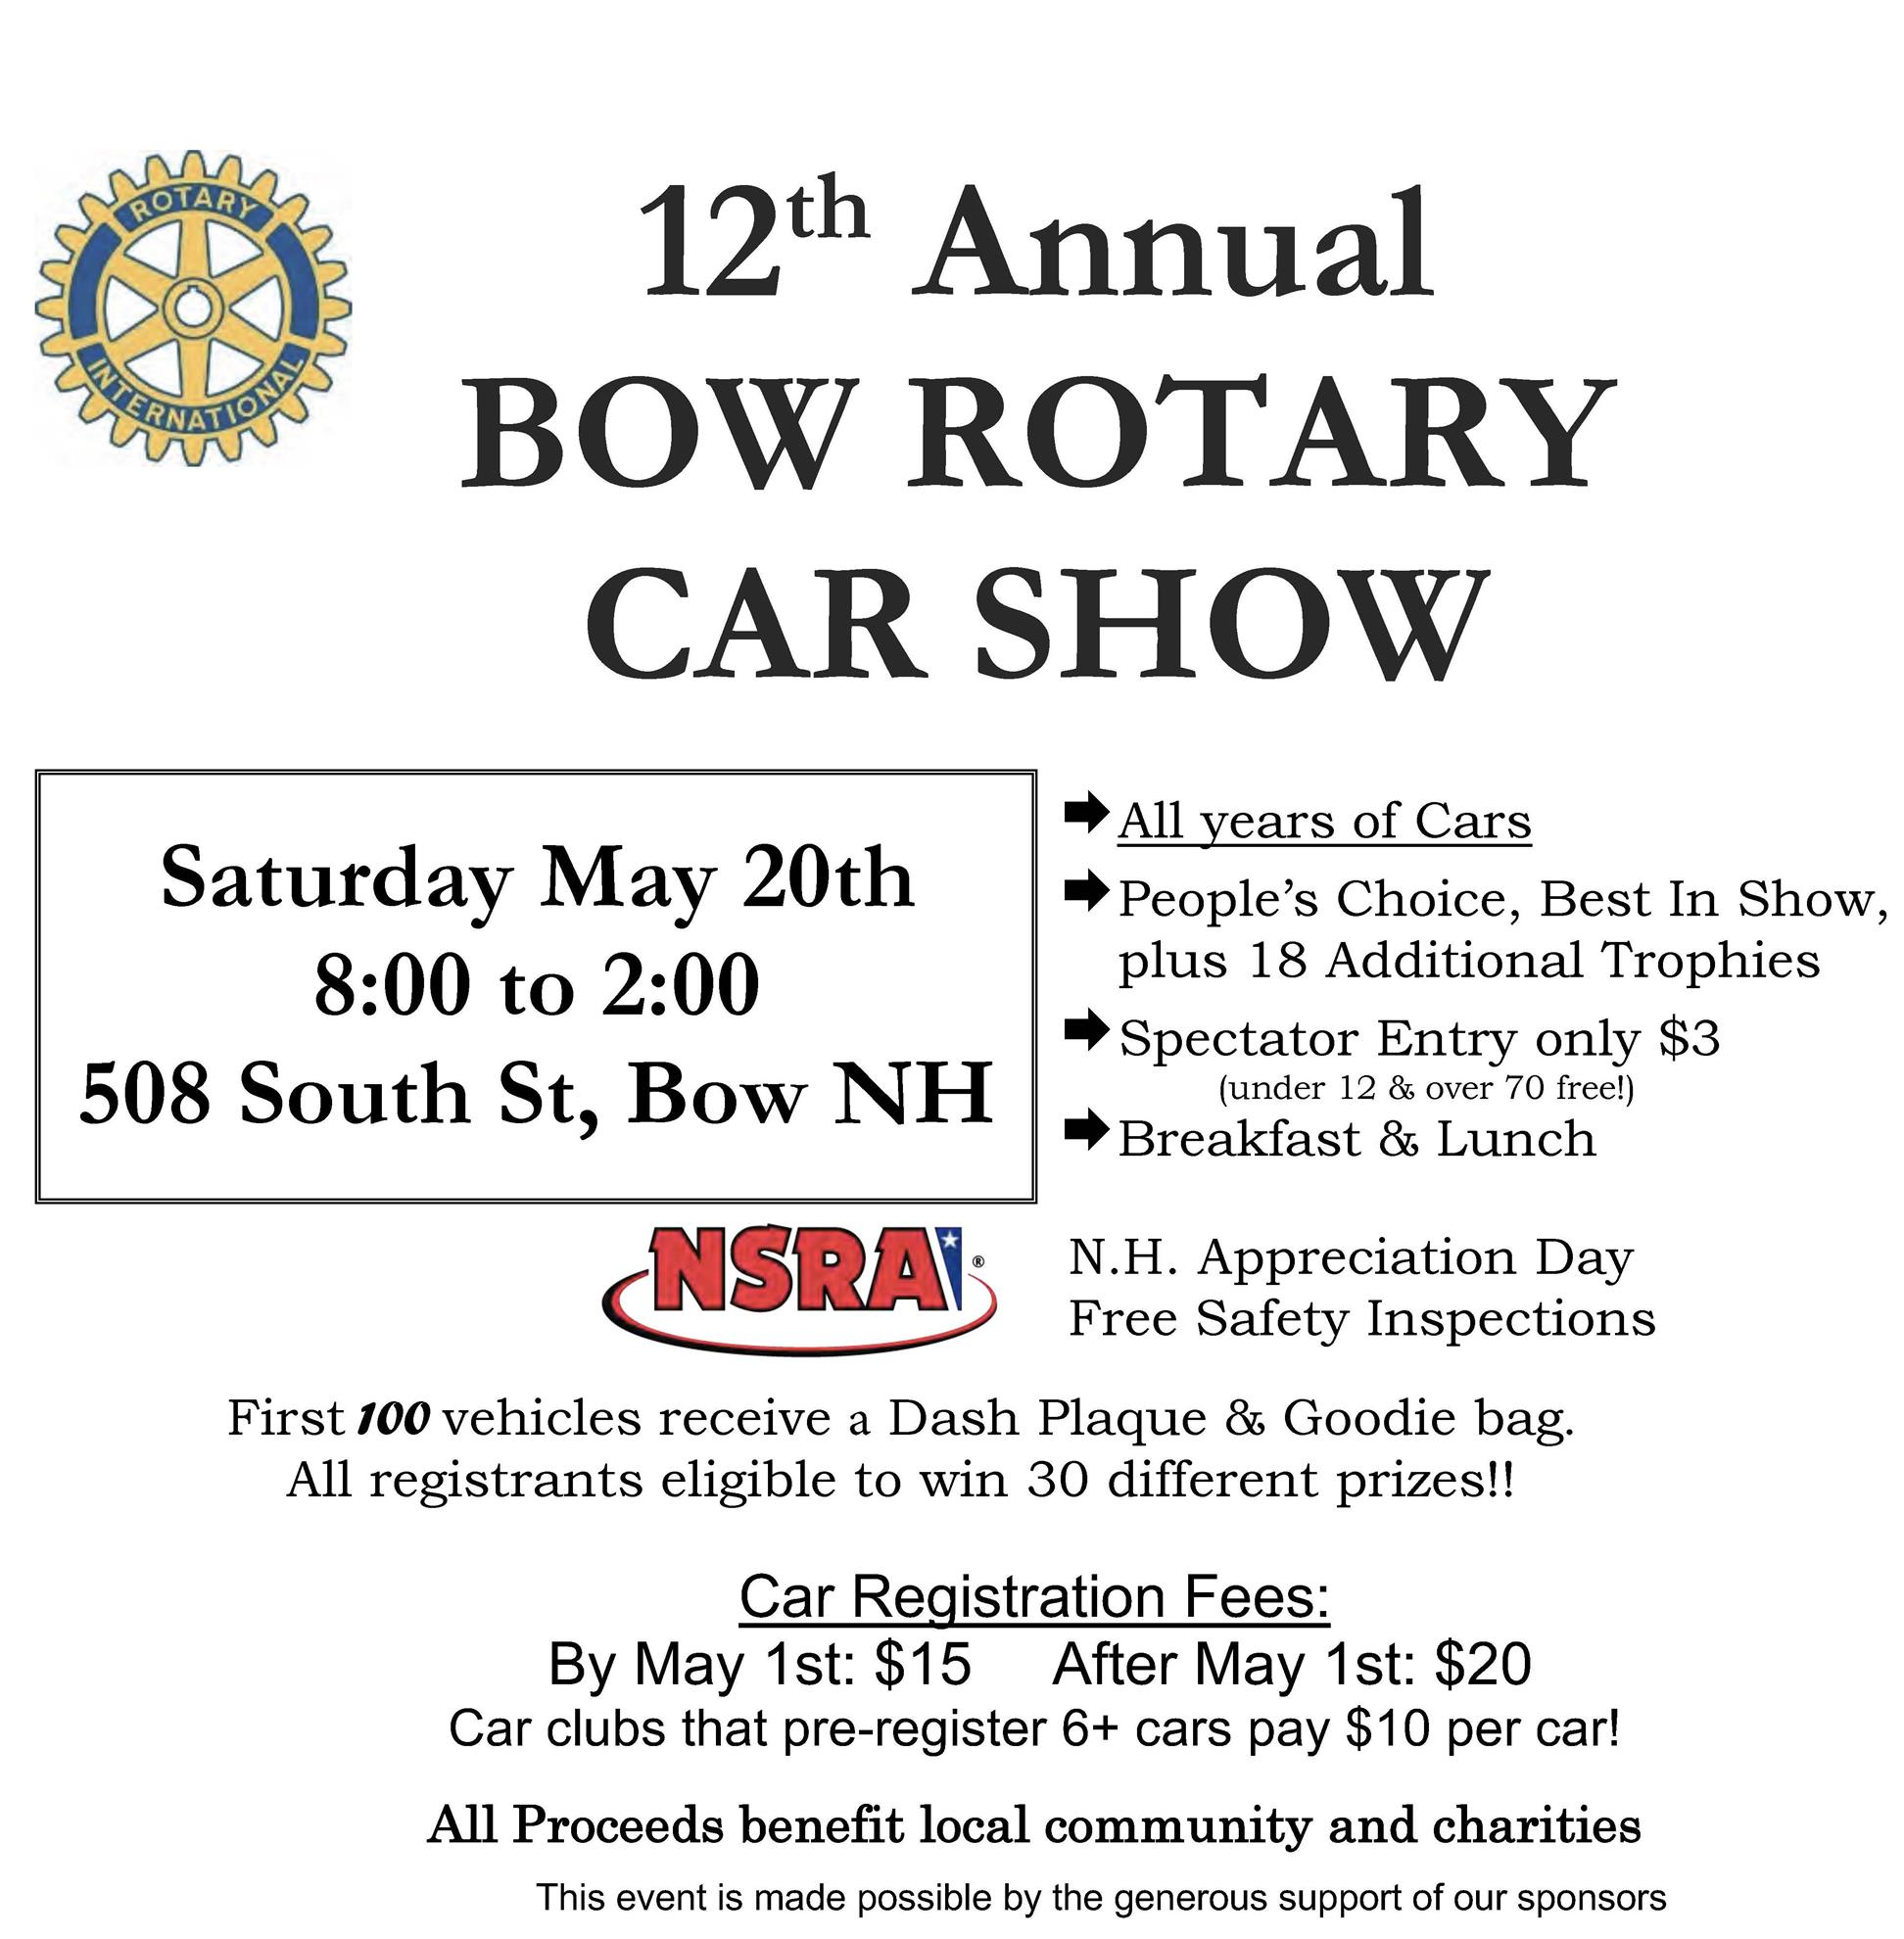 Bow Rotary Car Show Info The Rotary Club of Bow, New Hampshire